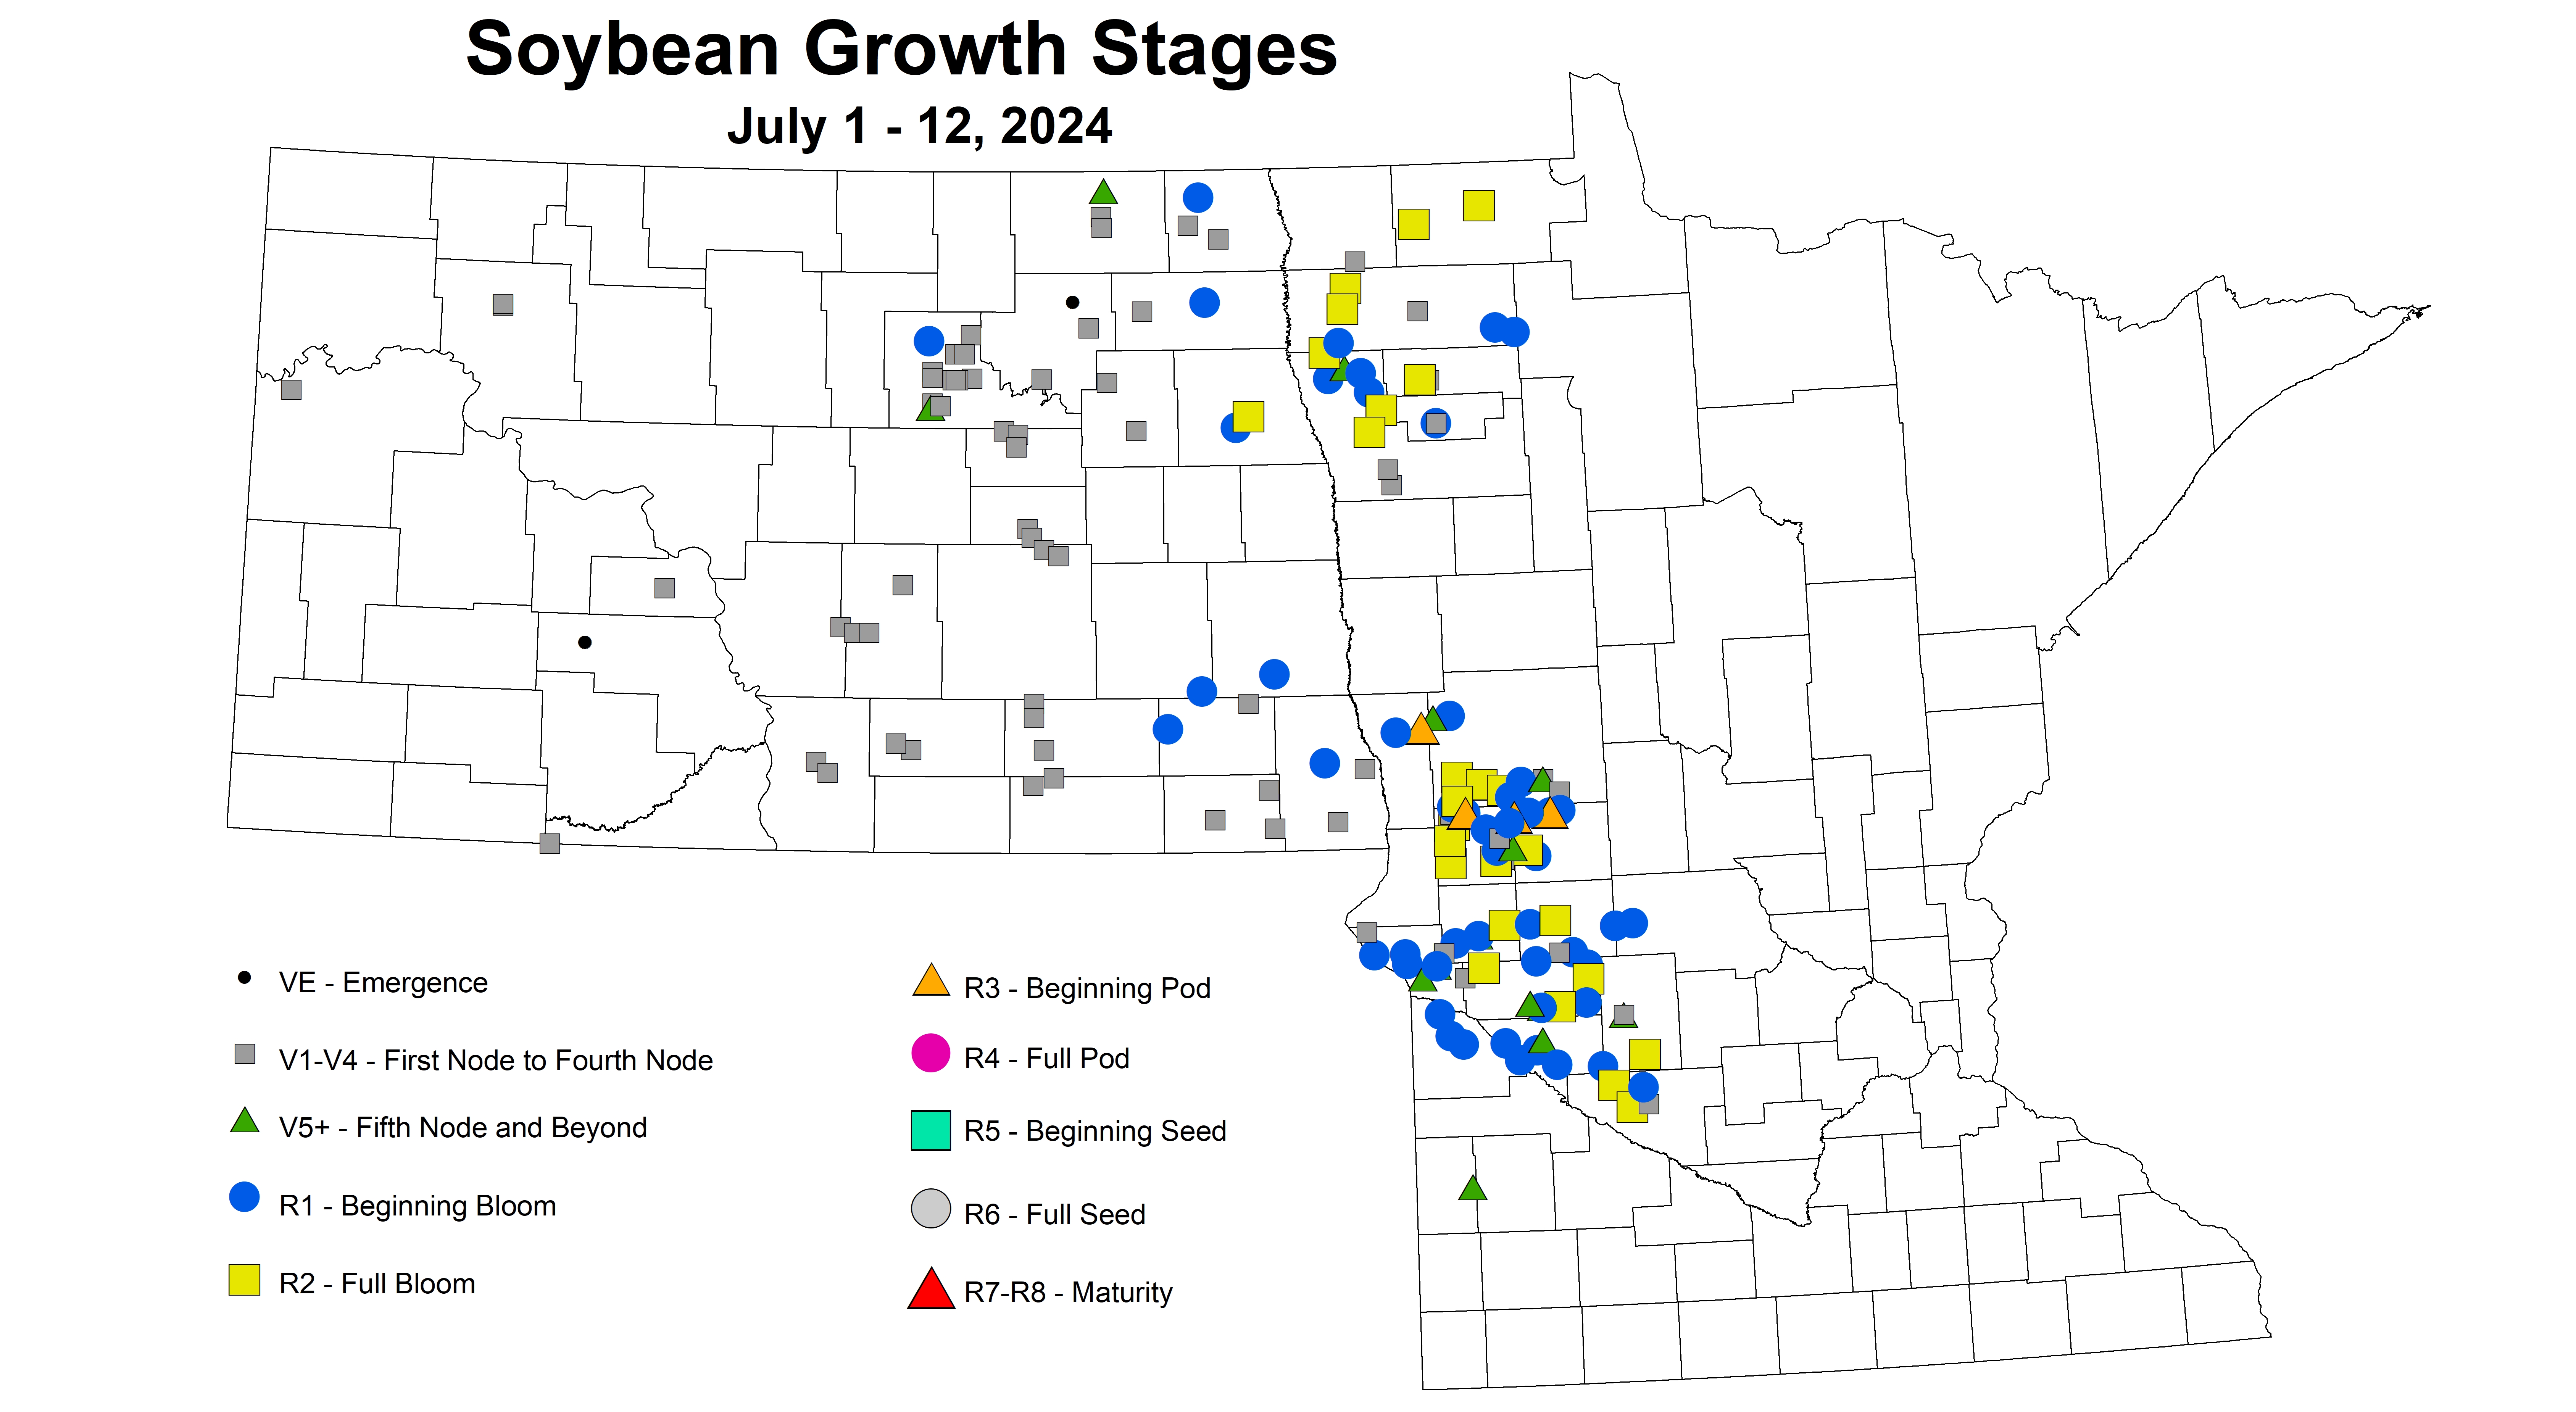 soybean growth stages July 1-12 2024